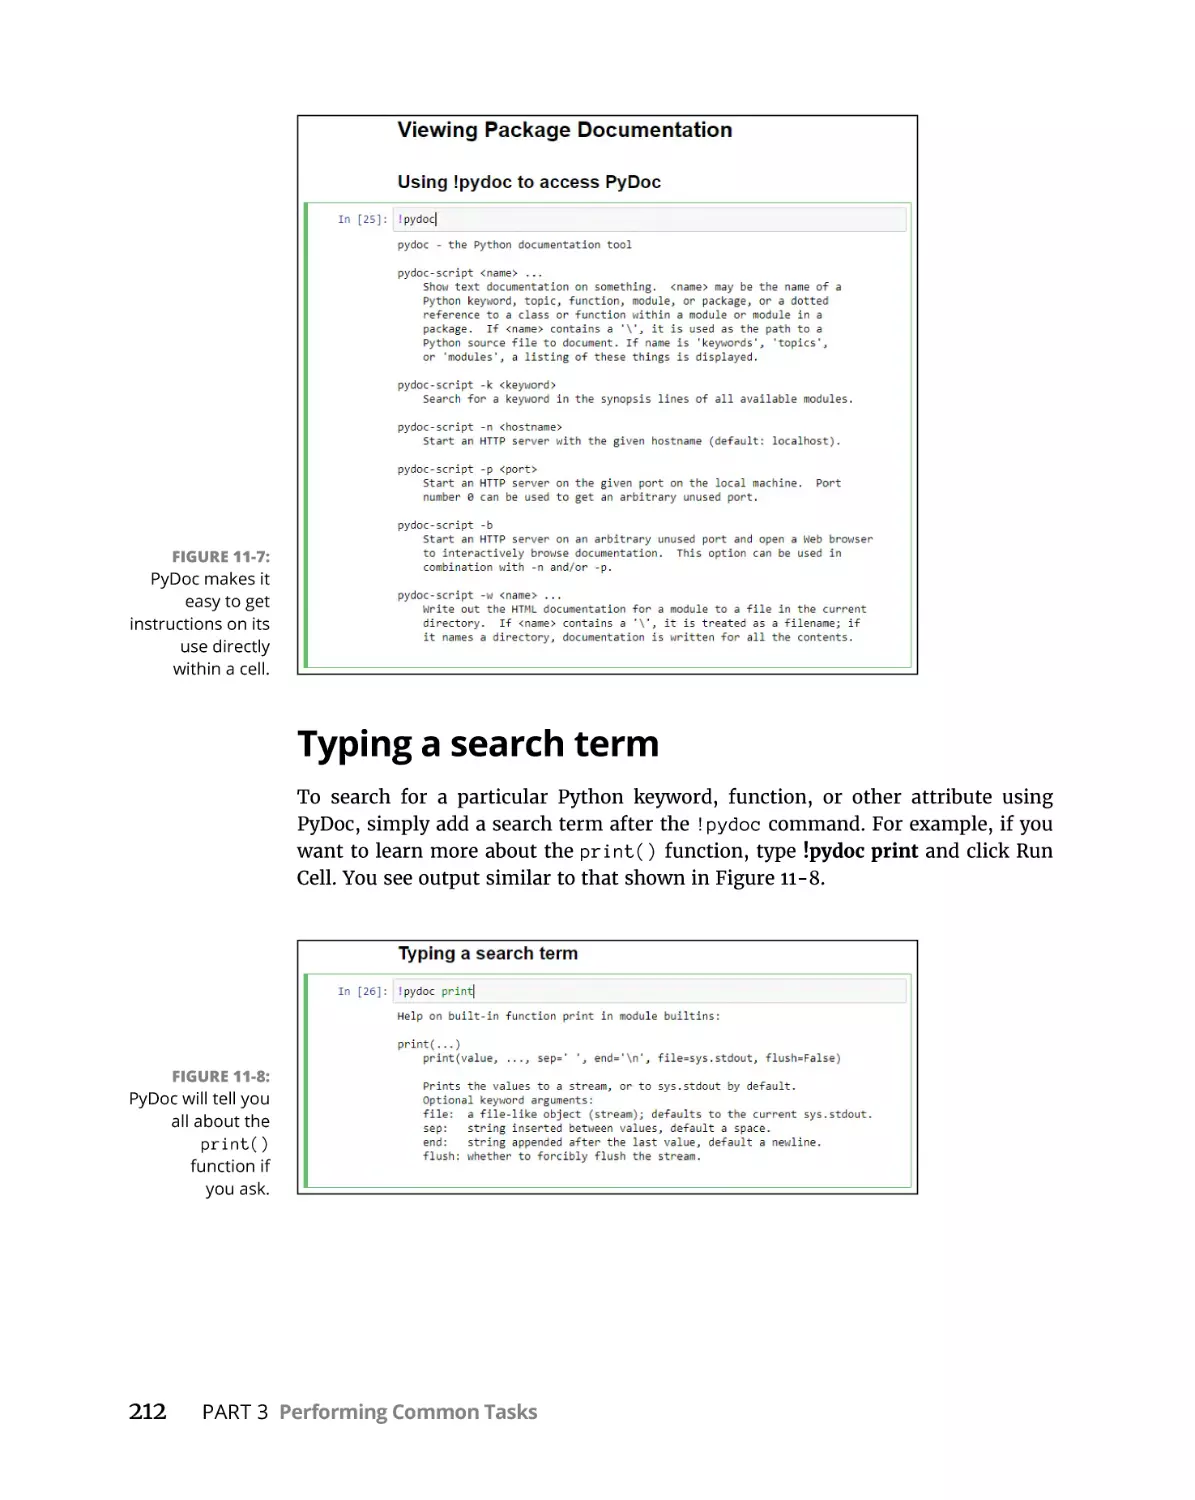 Typing a search term